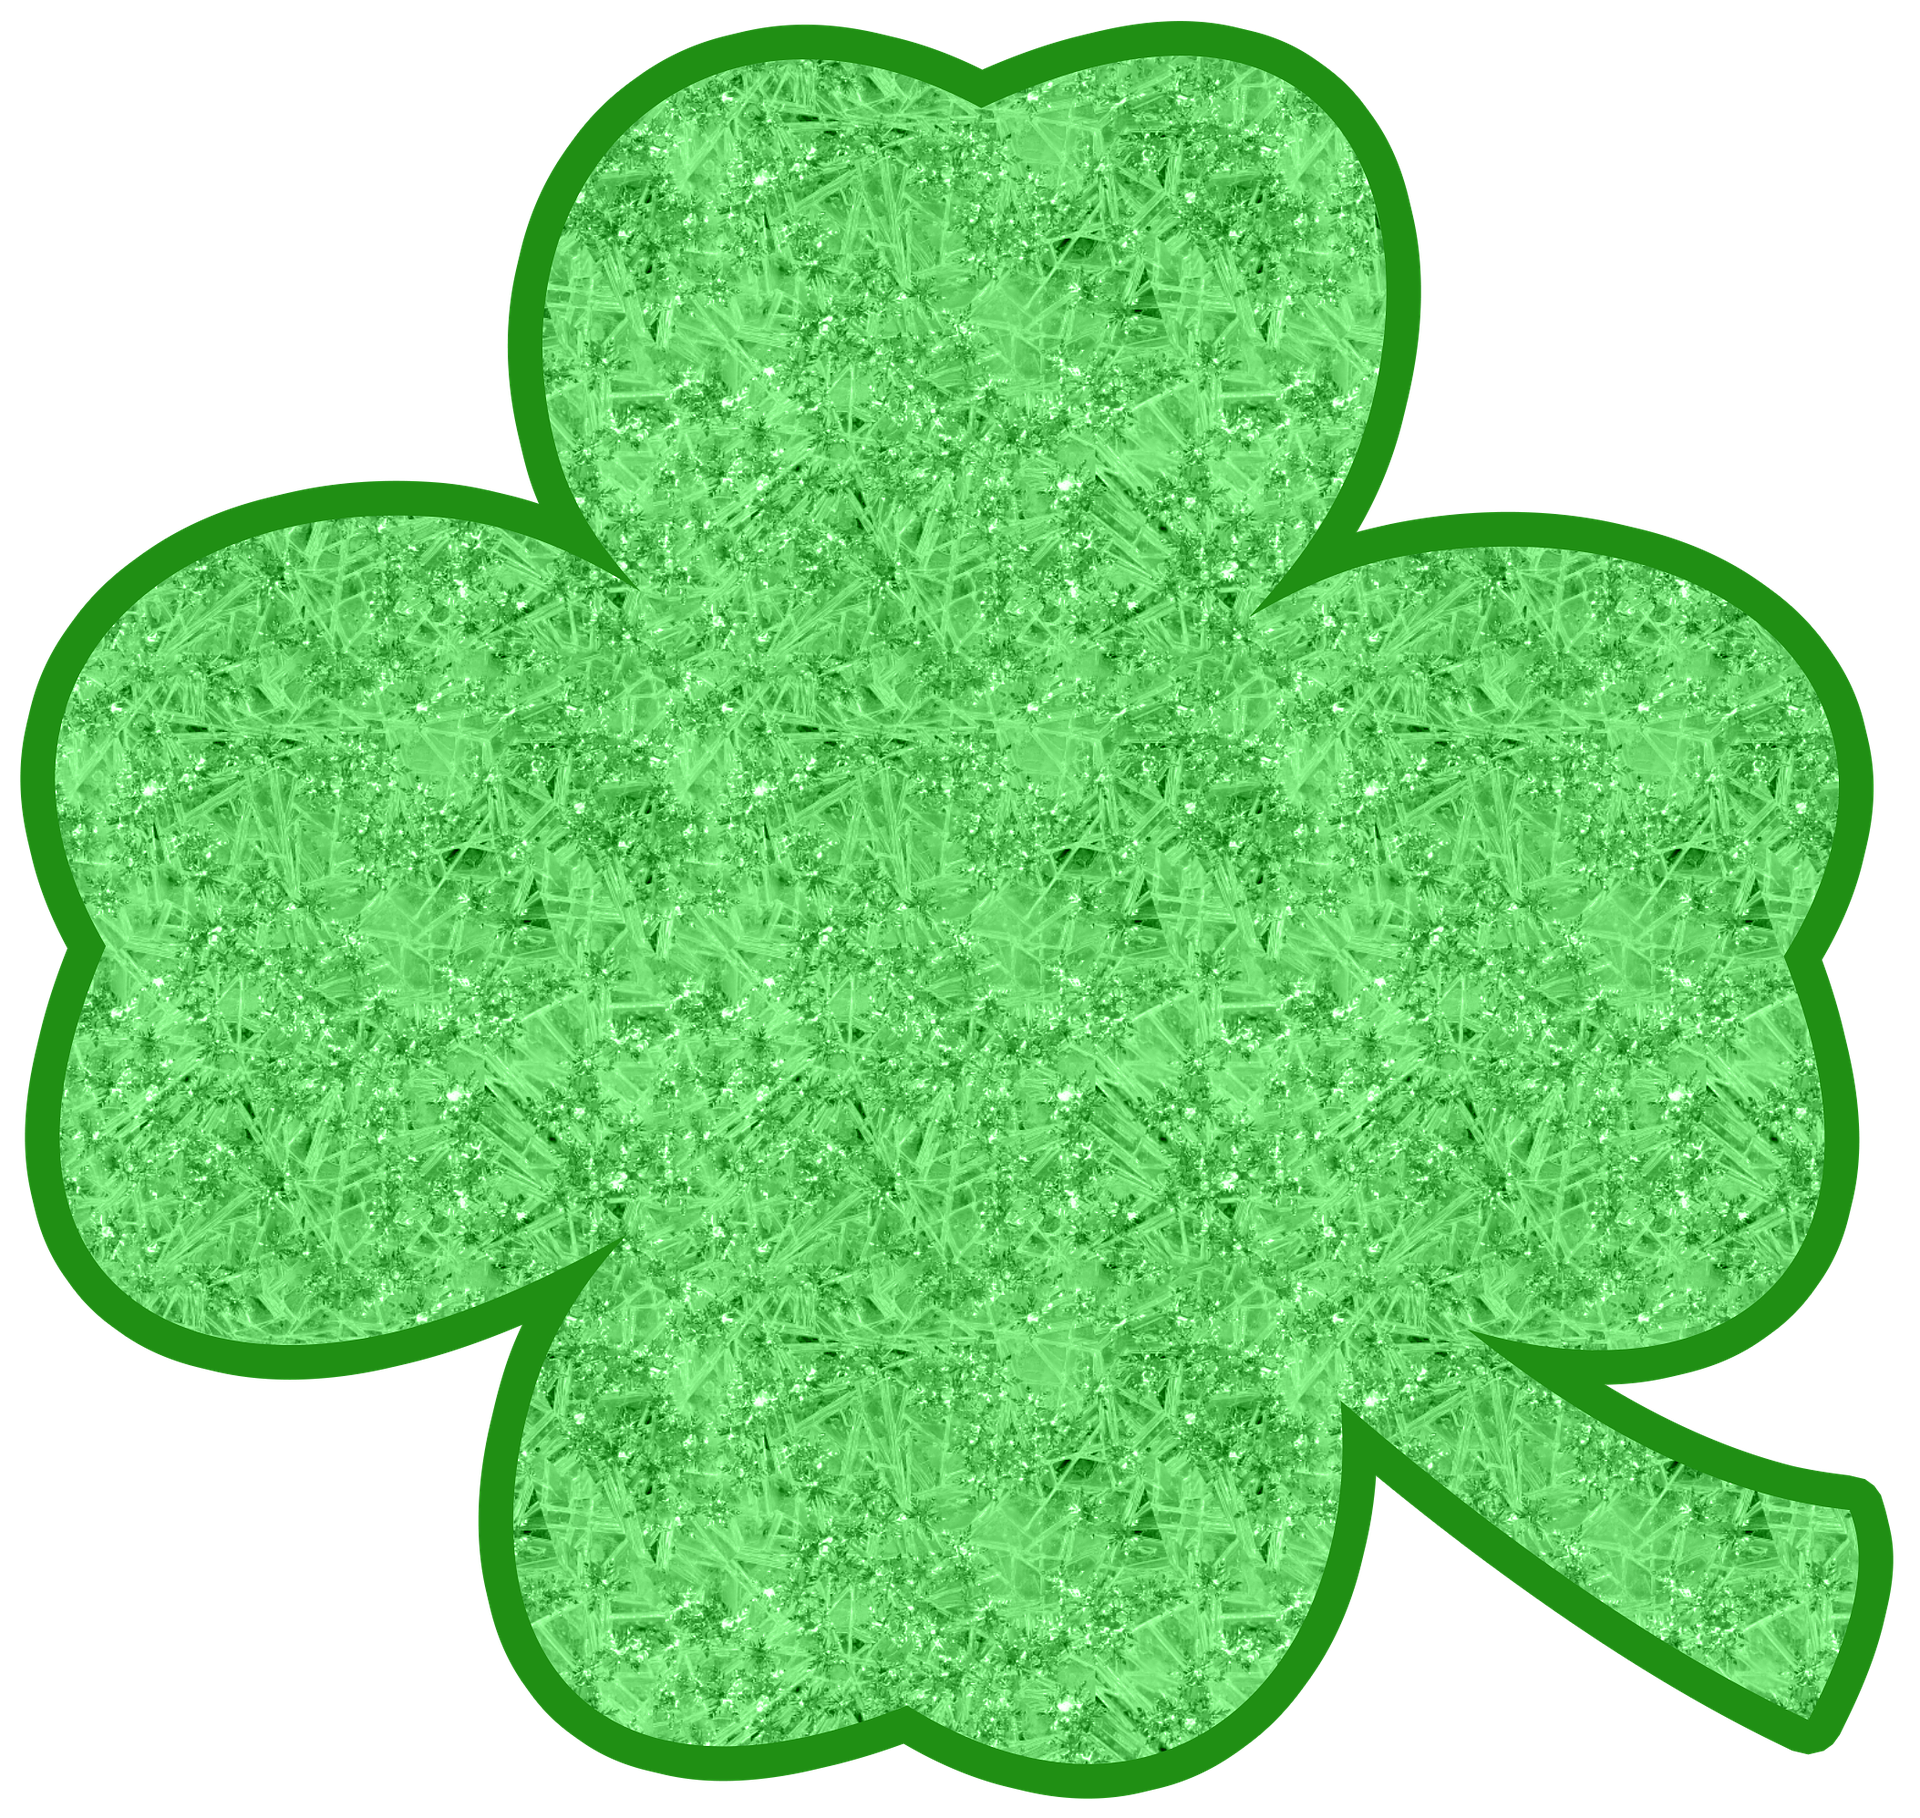 clover clipart march holiday